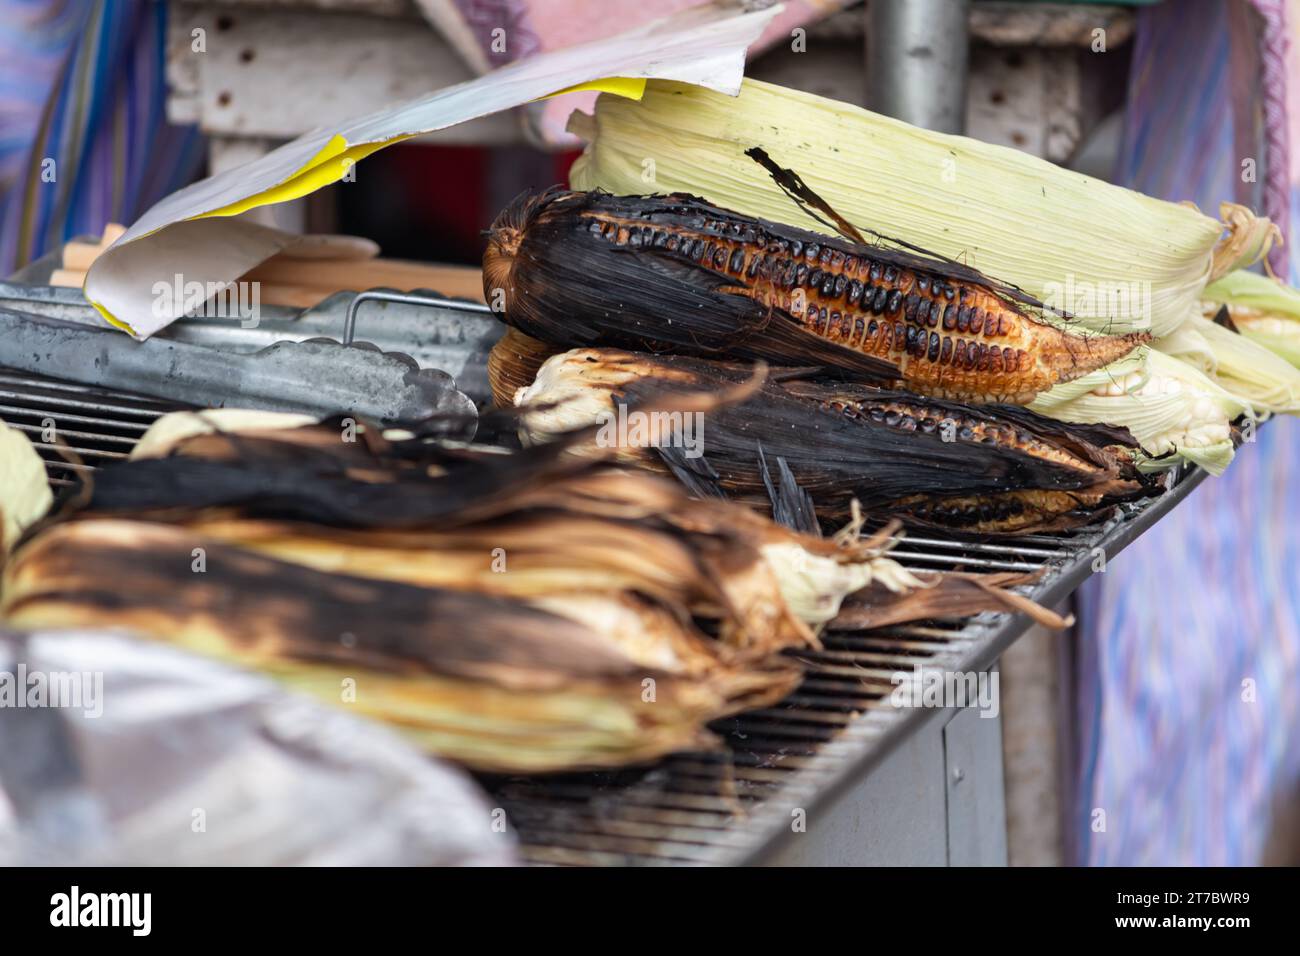 Grilled corn, Mexican street food. Mexican traditions. Stock Photo